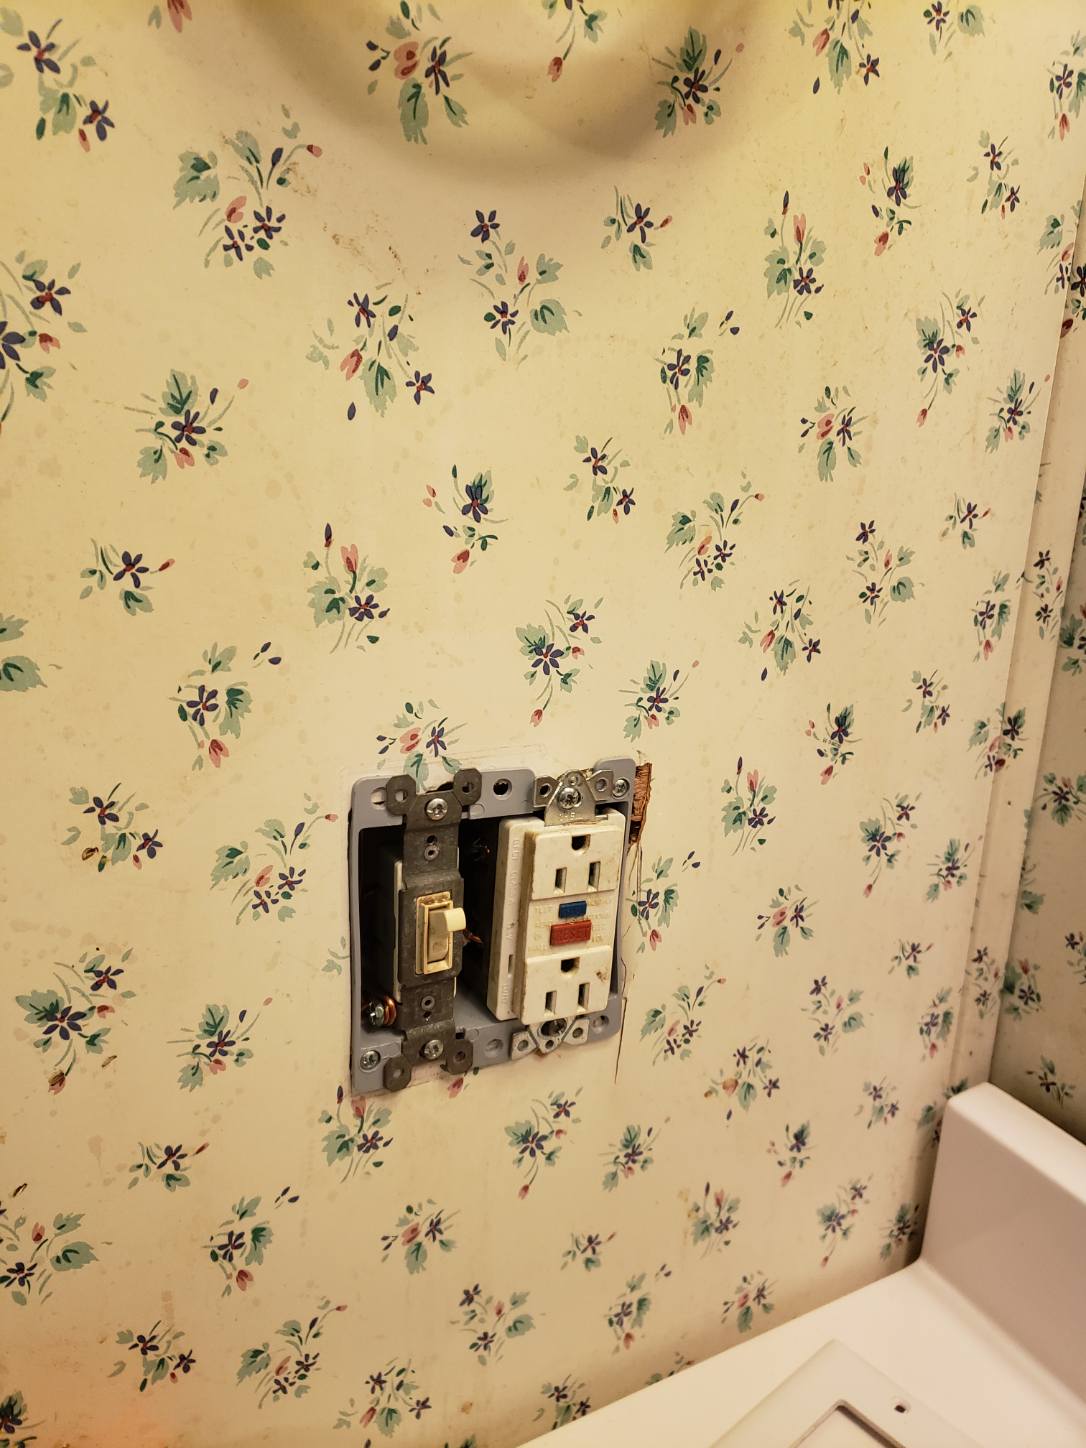 uncovered outlet after realizing it didn't work